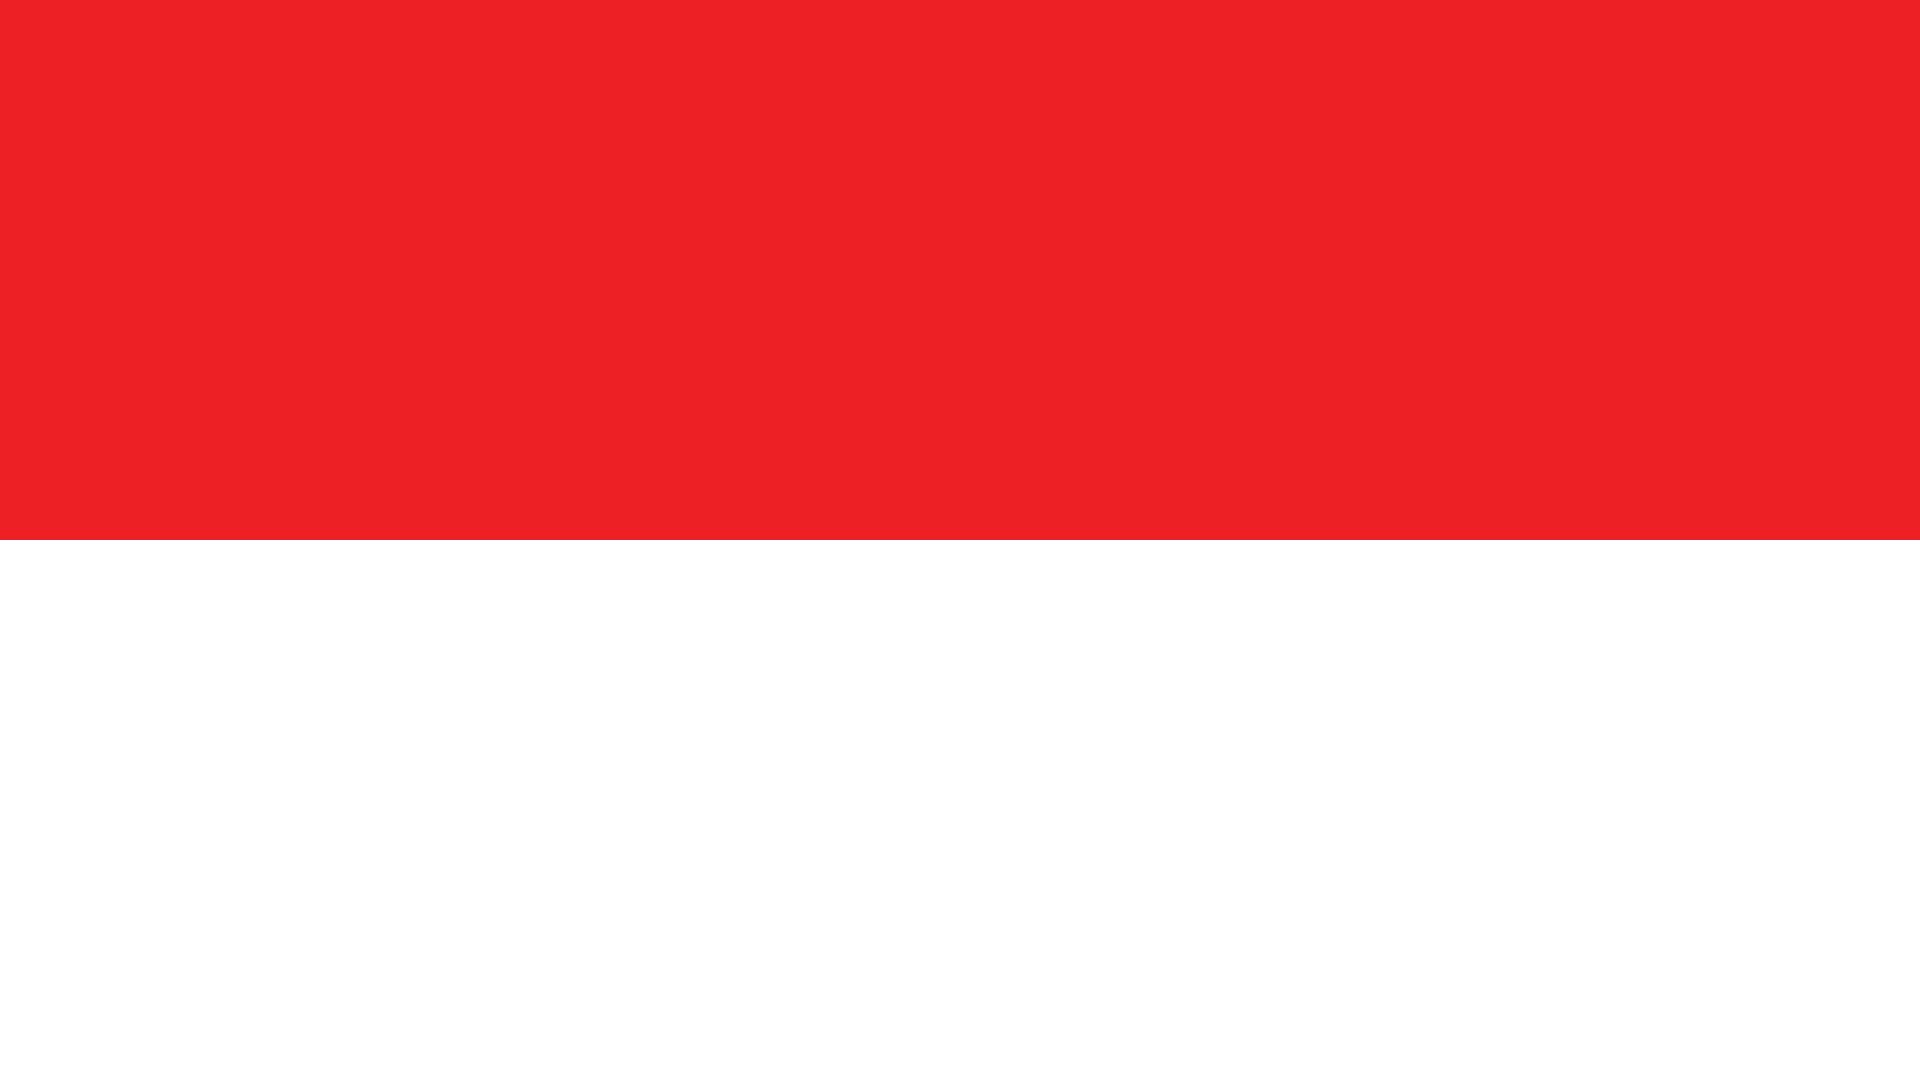 Red and white flag